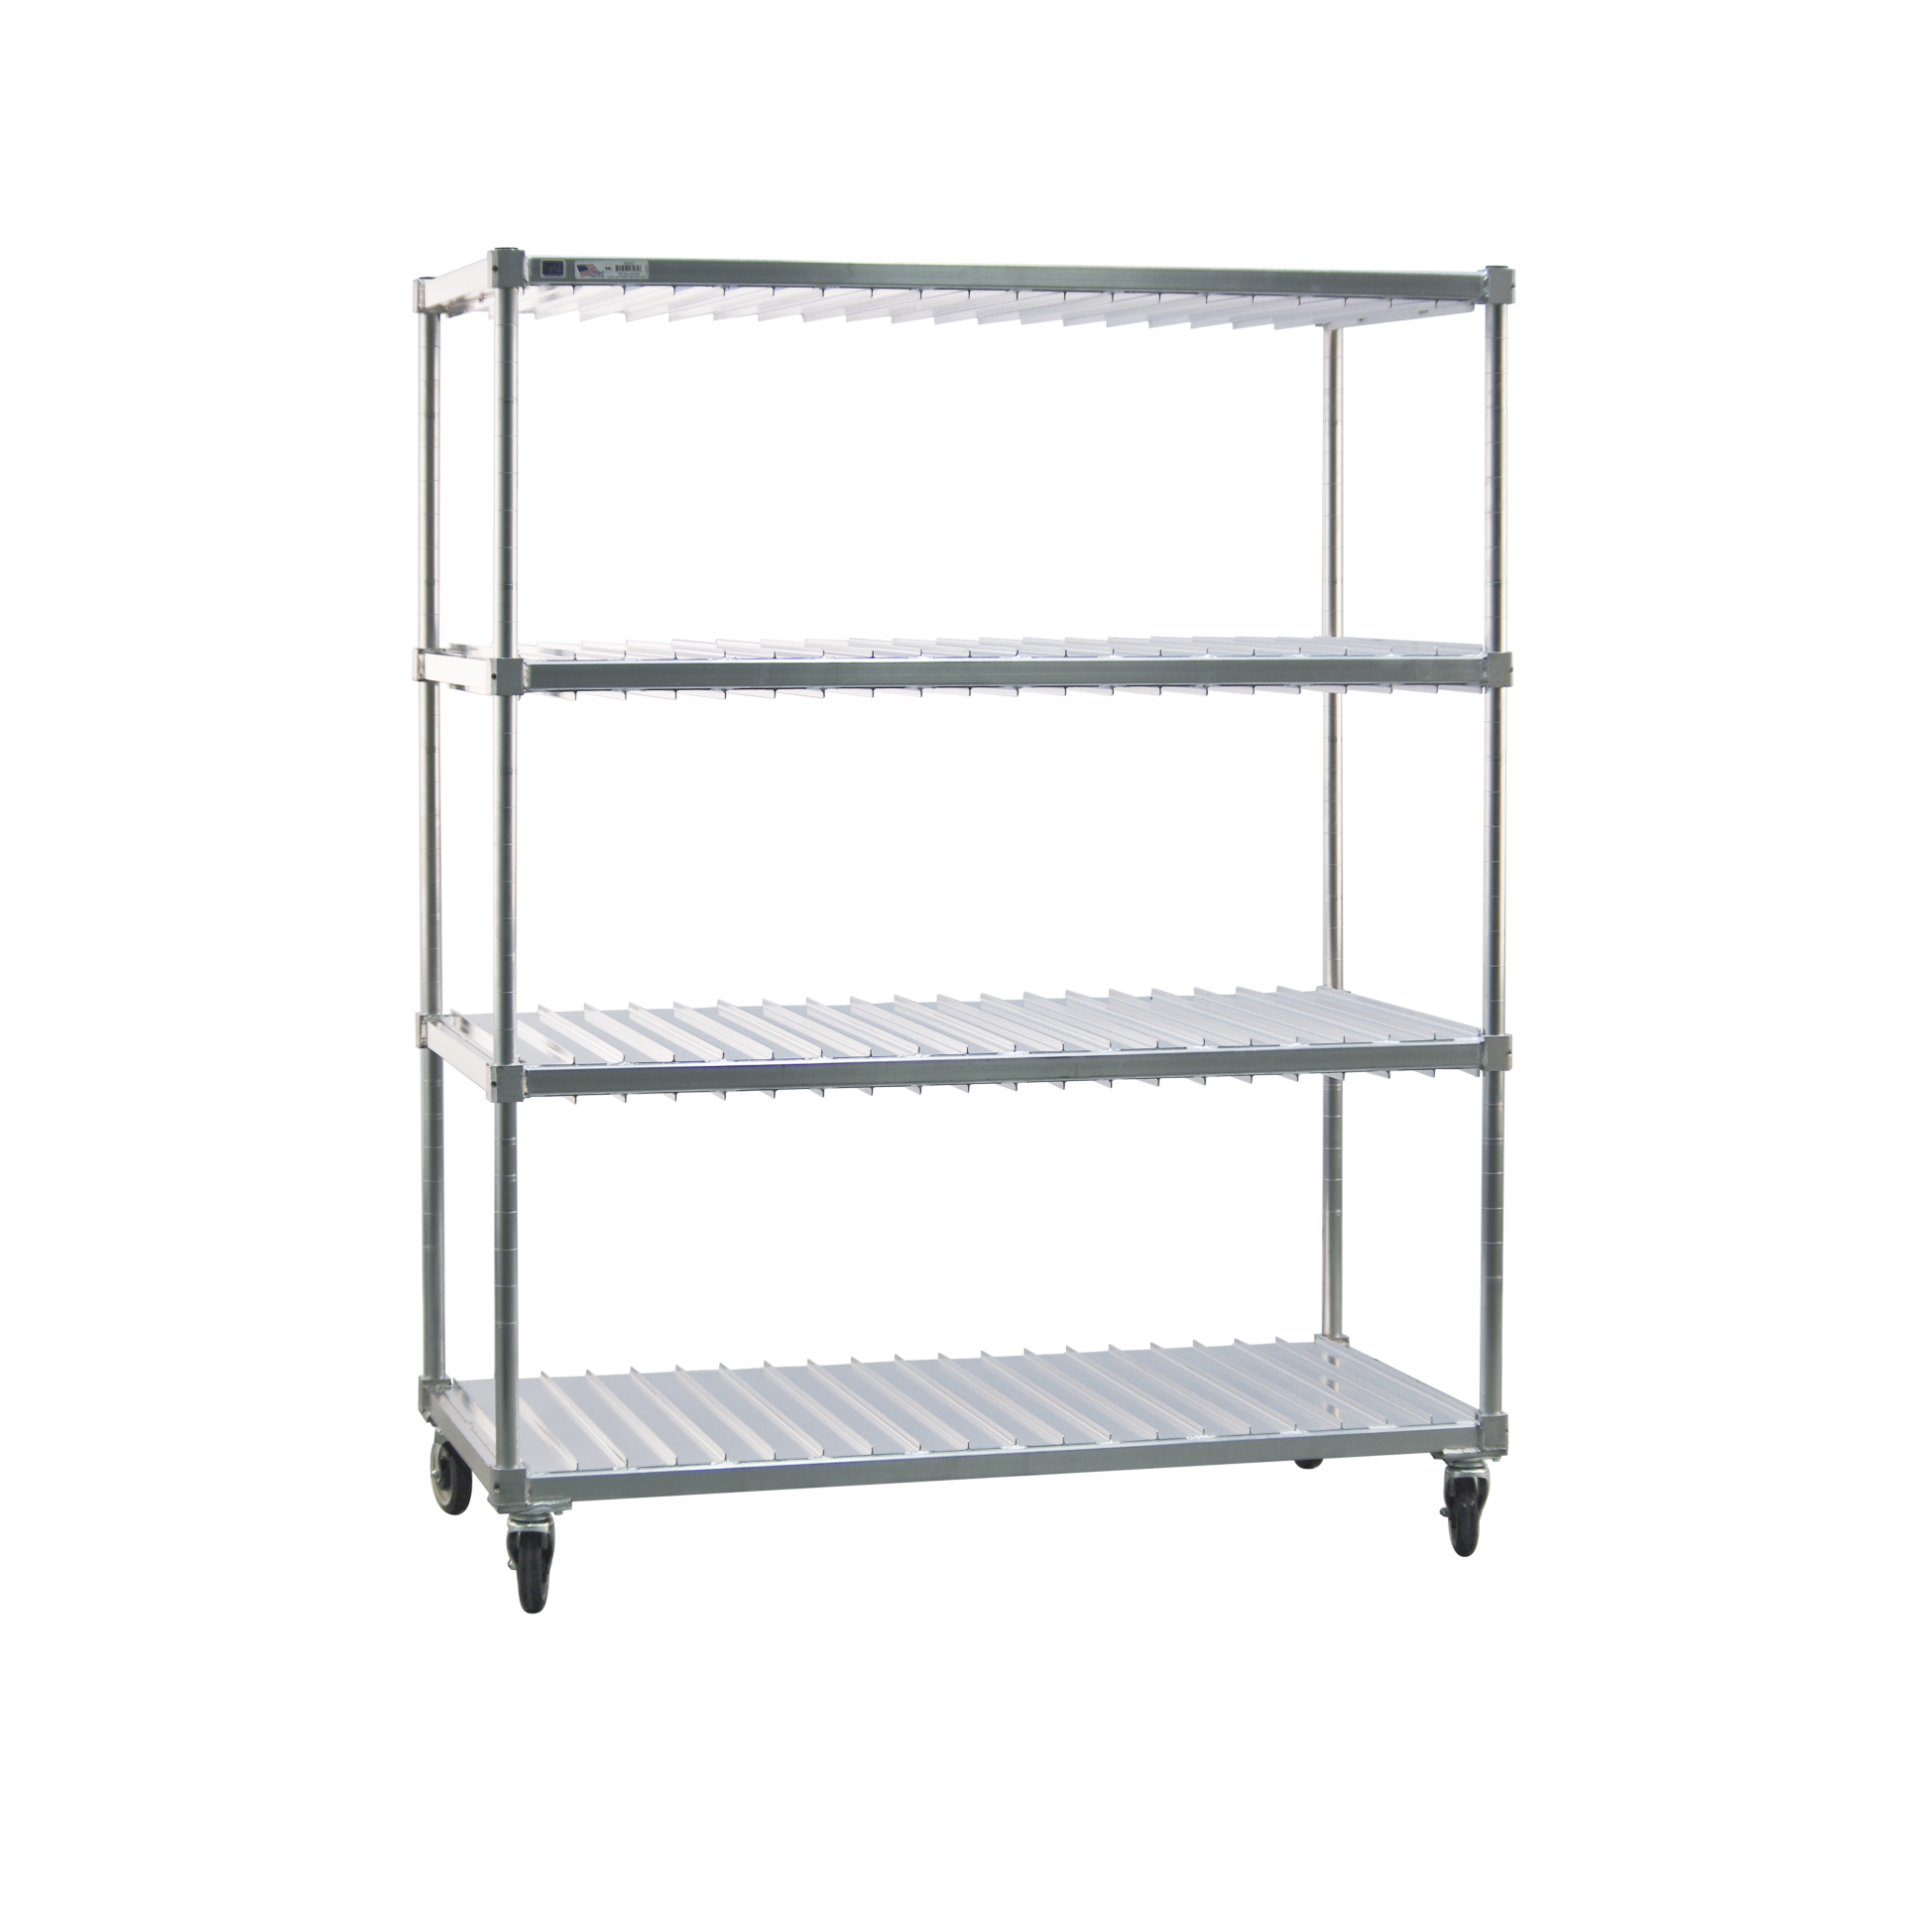 Adjustable Tray Drying Racks - New Age Industrial